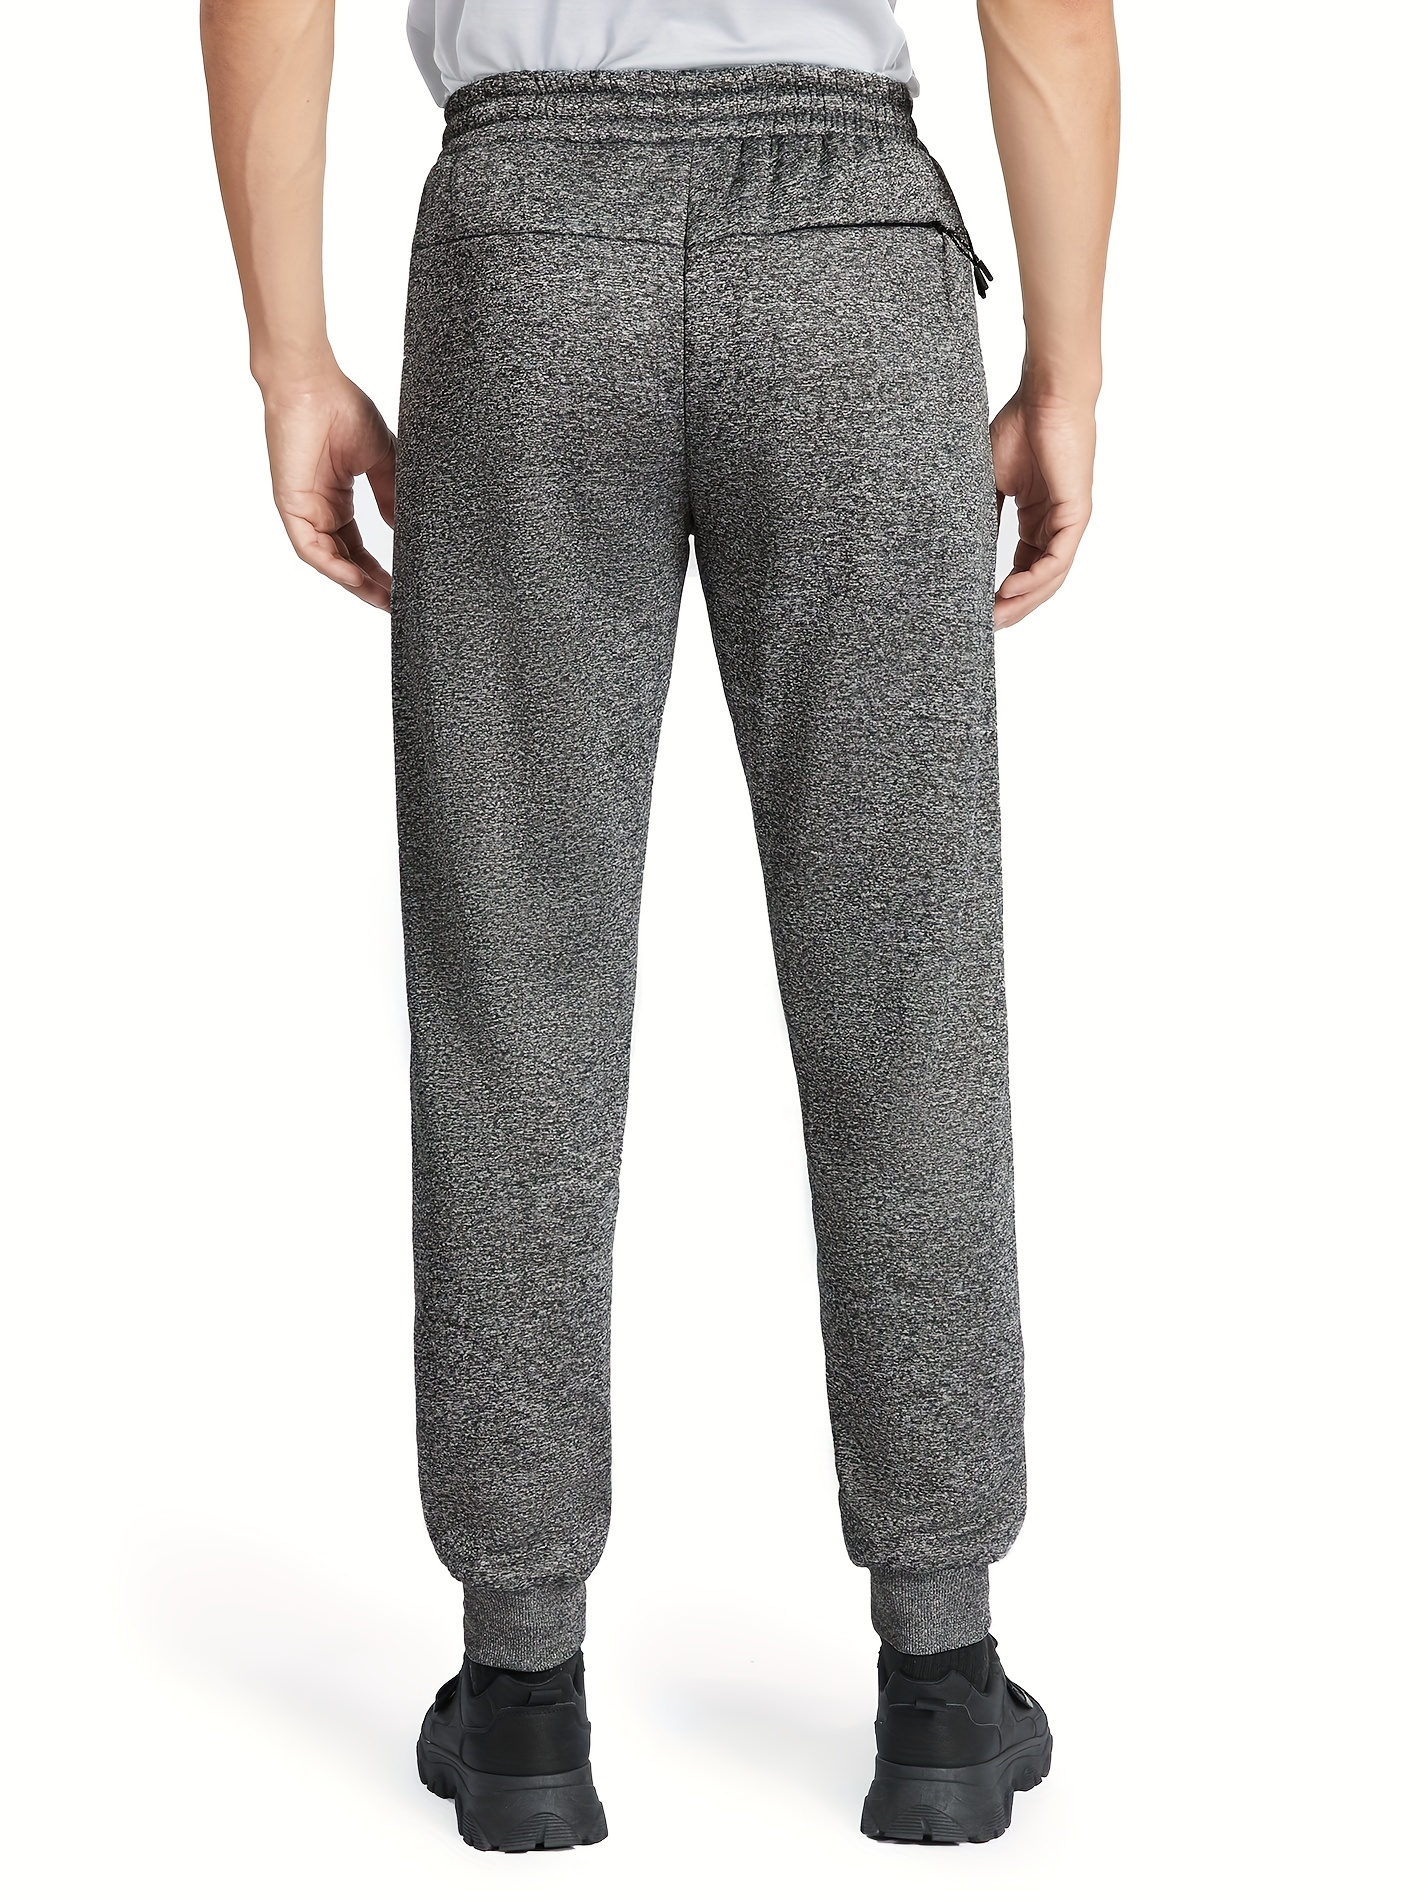 Men's Thermal Fleece Pants, Casual Warm Joggers For Fall Winter Outdoor